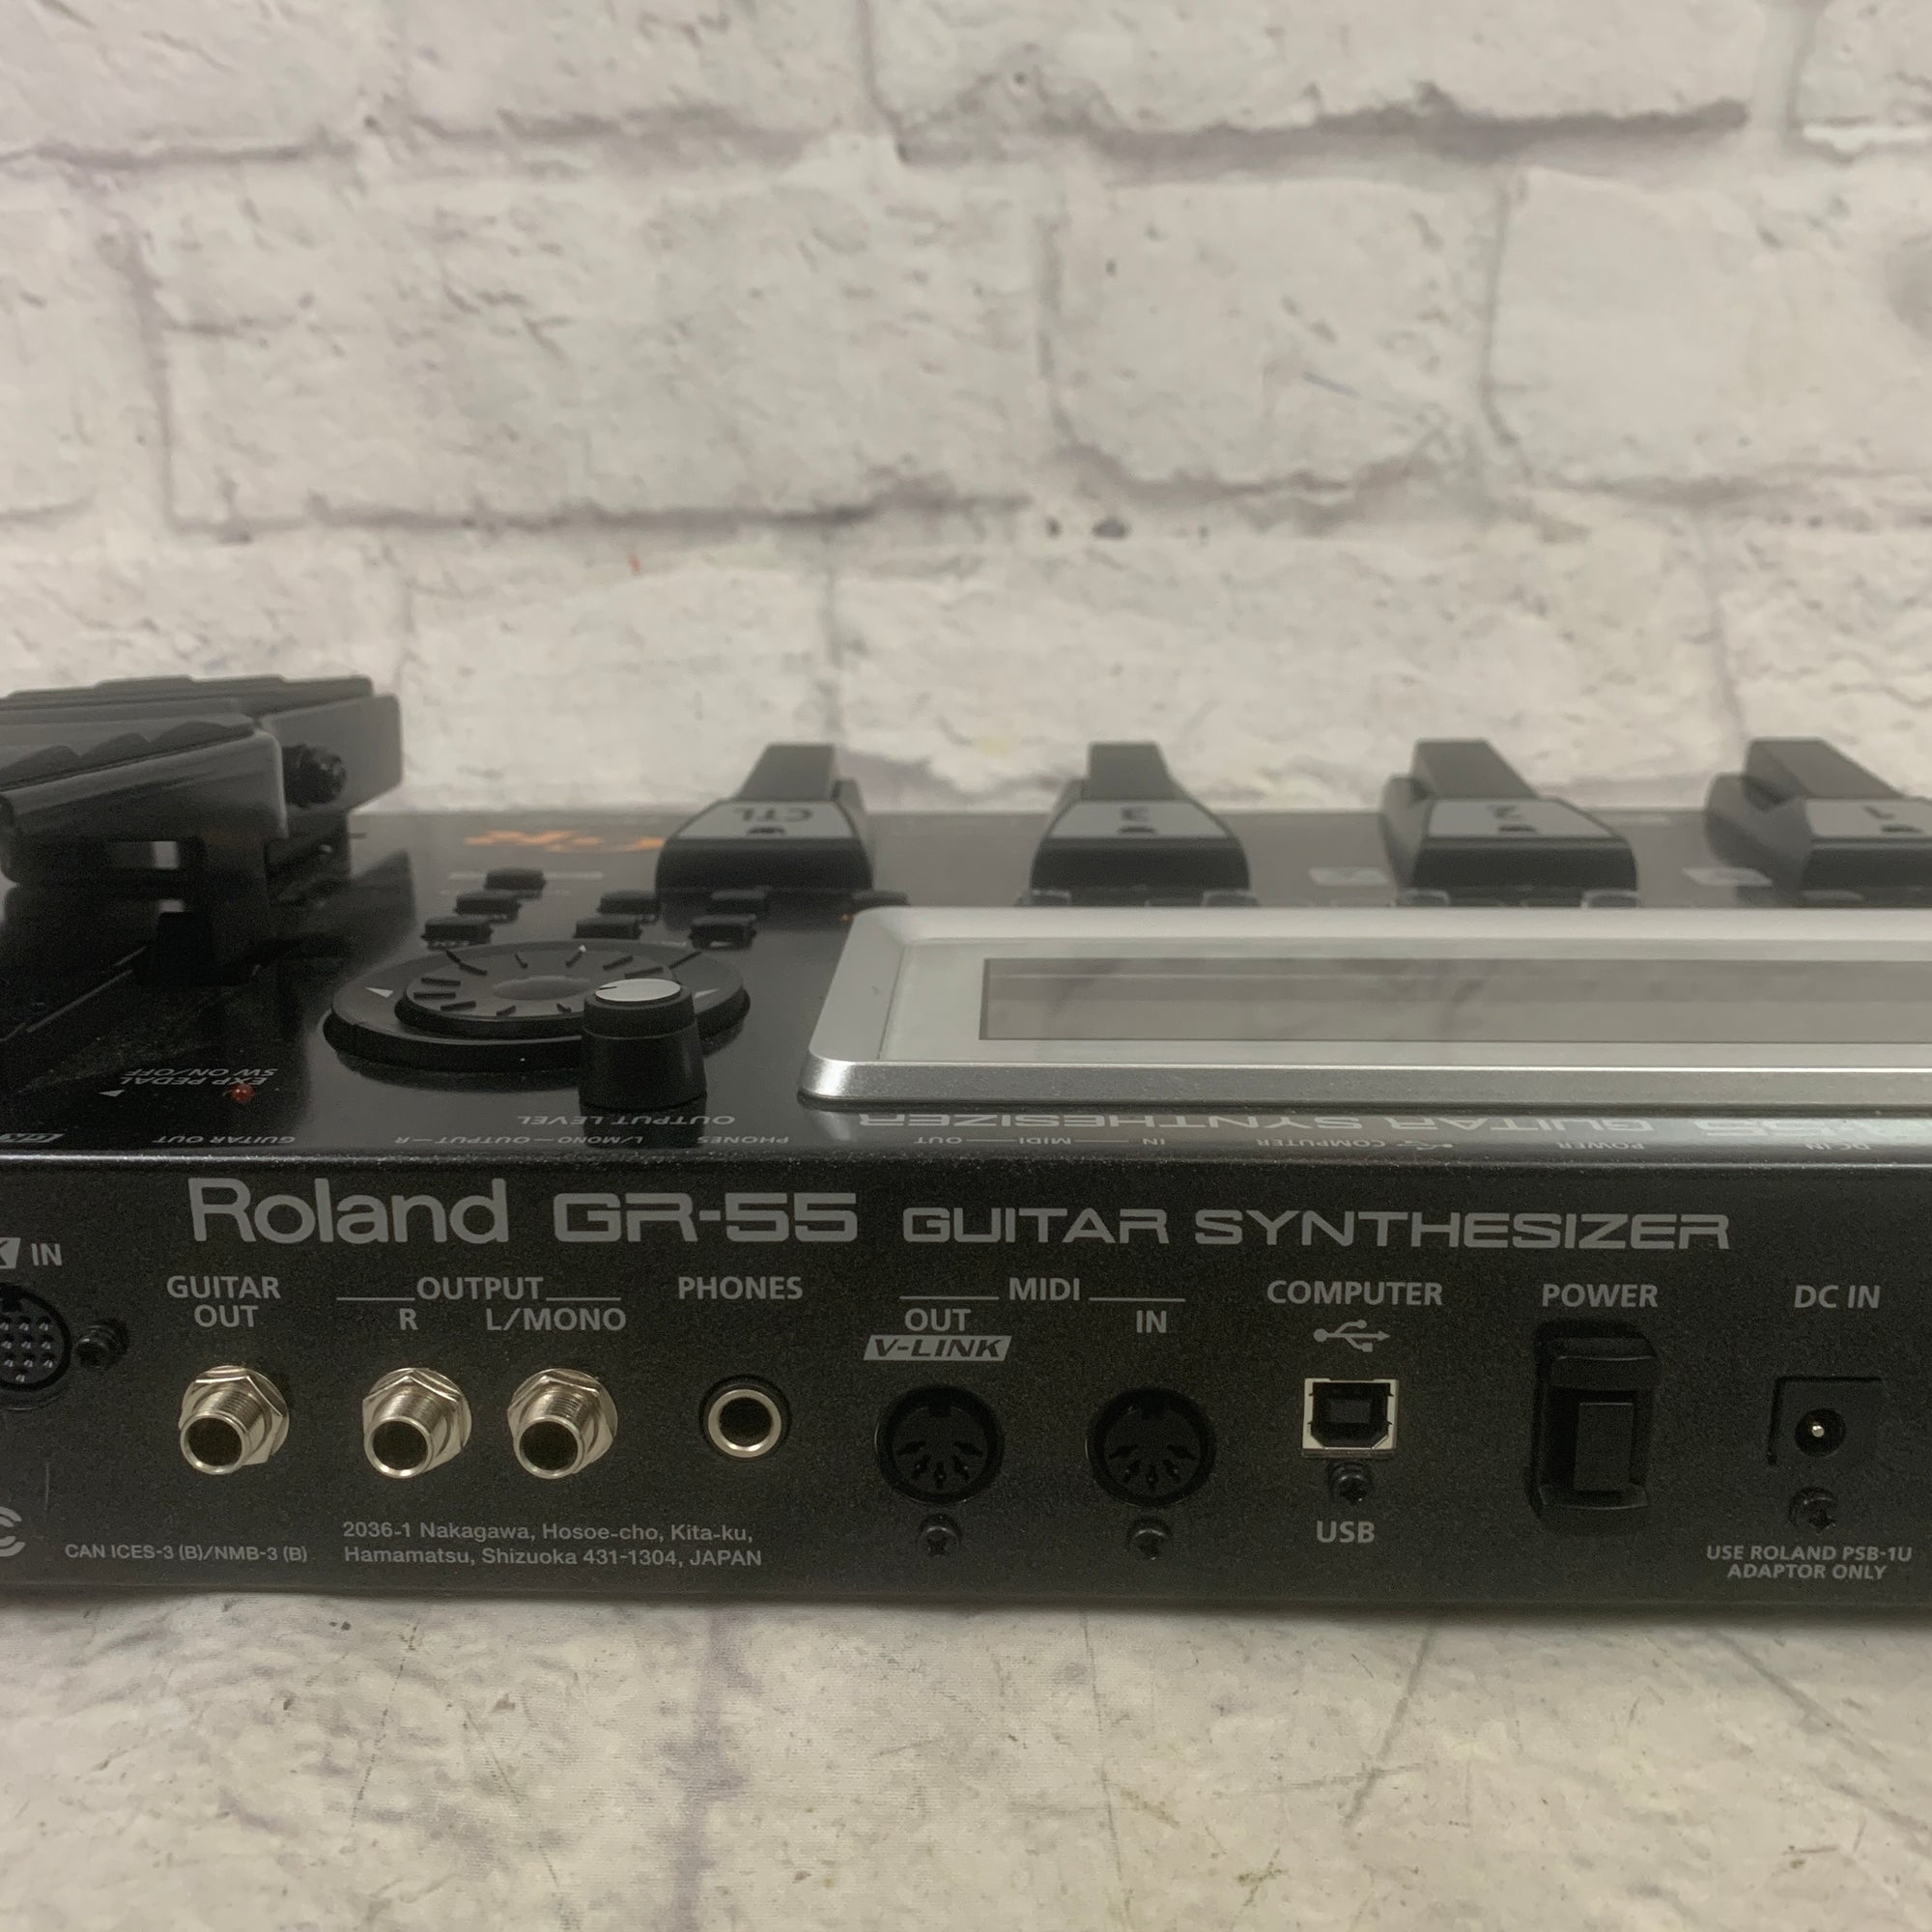 Roland GR-55 Guitar Synthesizer Multi-Effects Pedal Modeling Unit